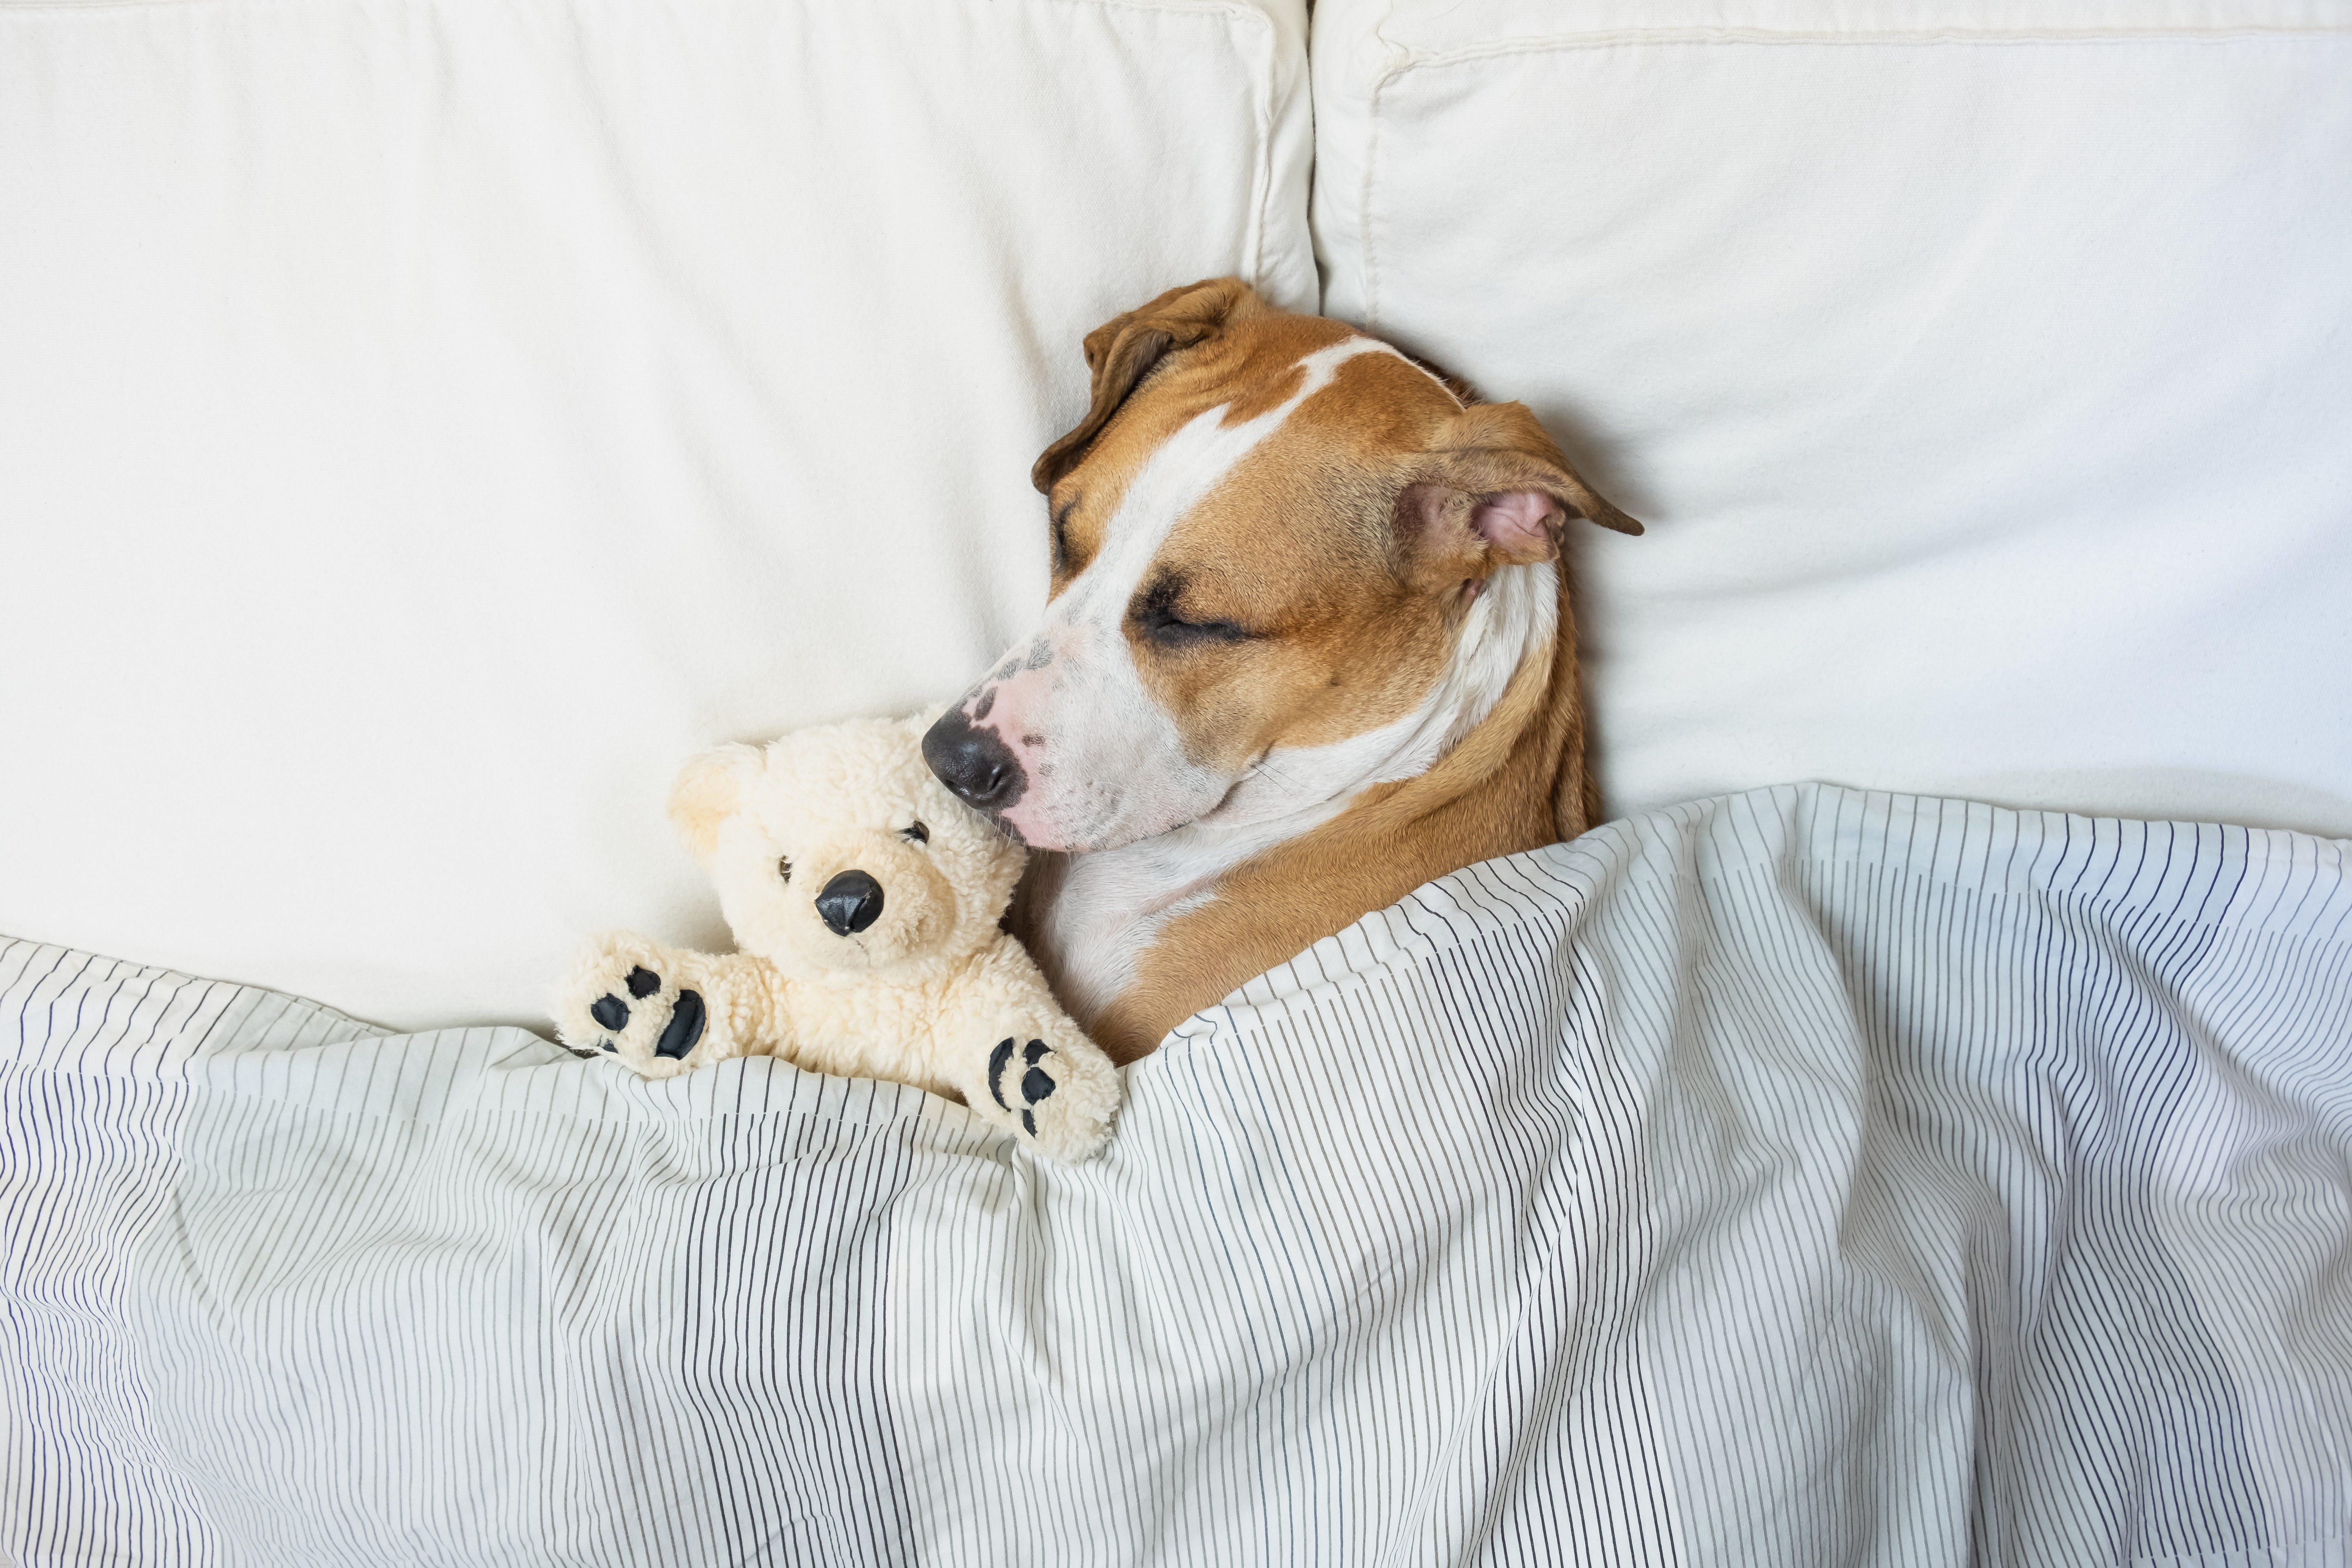 How Many Hours a Day Do Dogs Sleep? Reader's Digest